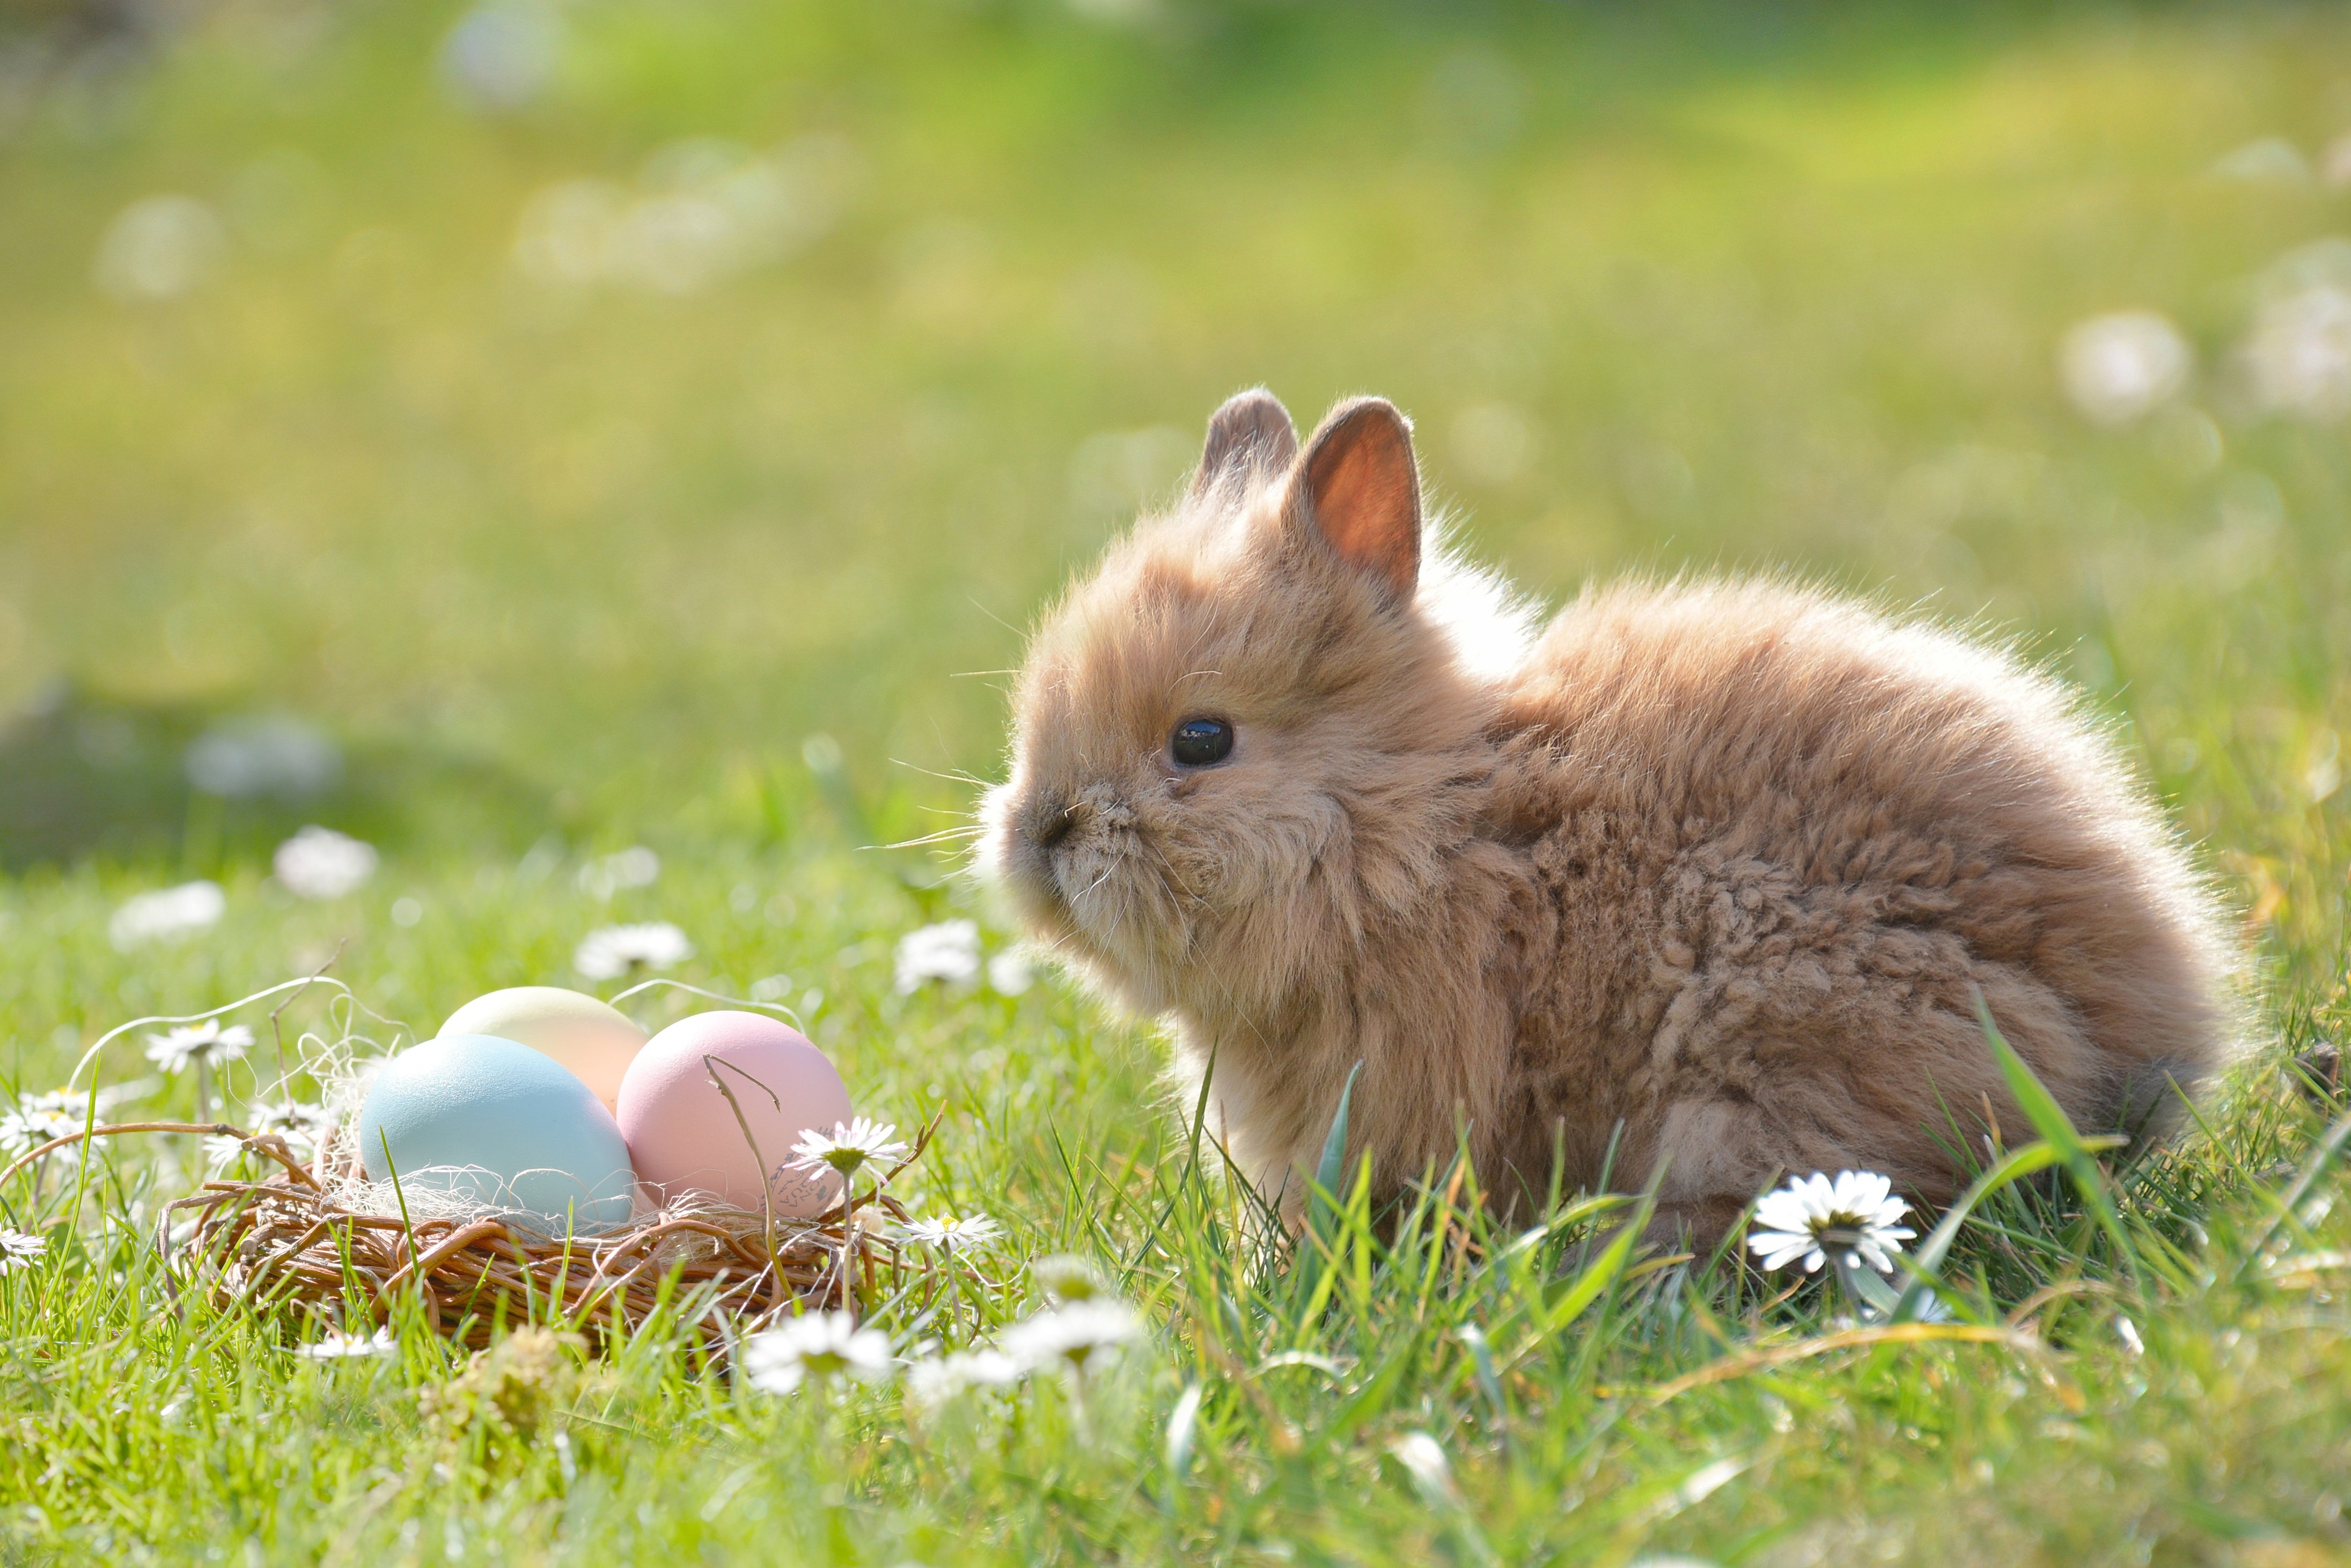 Photo of a small bunny looking at a basket with 3 pastel eggs inside.